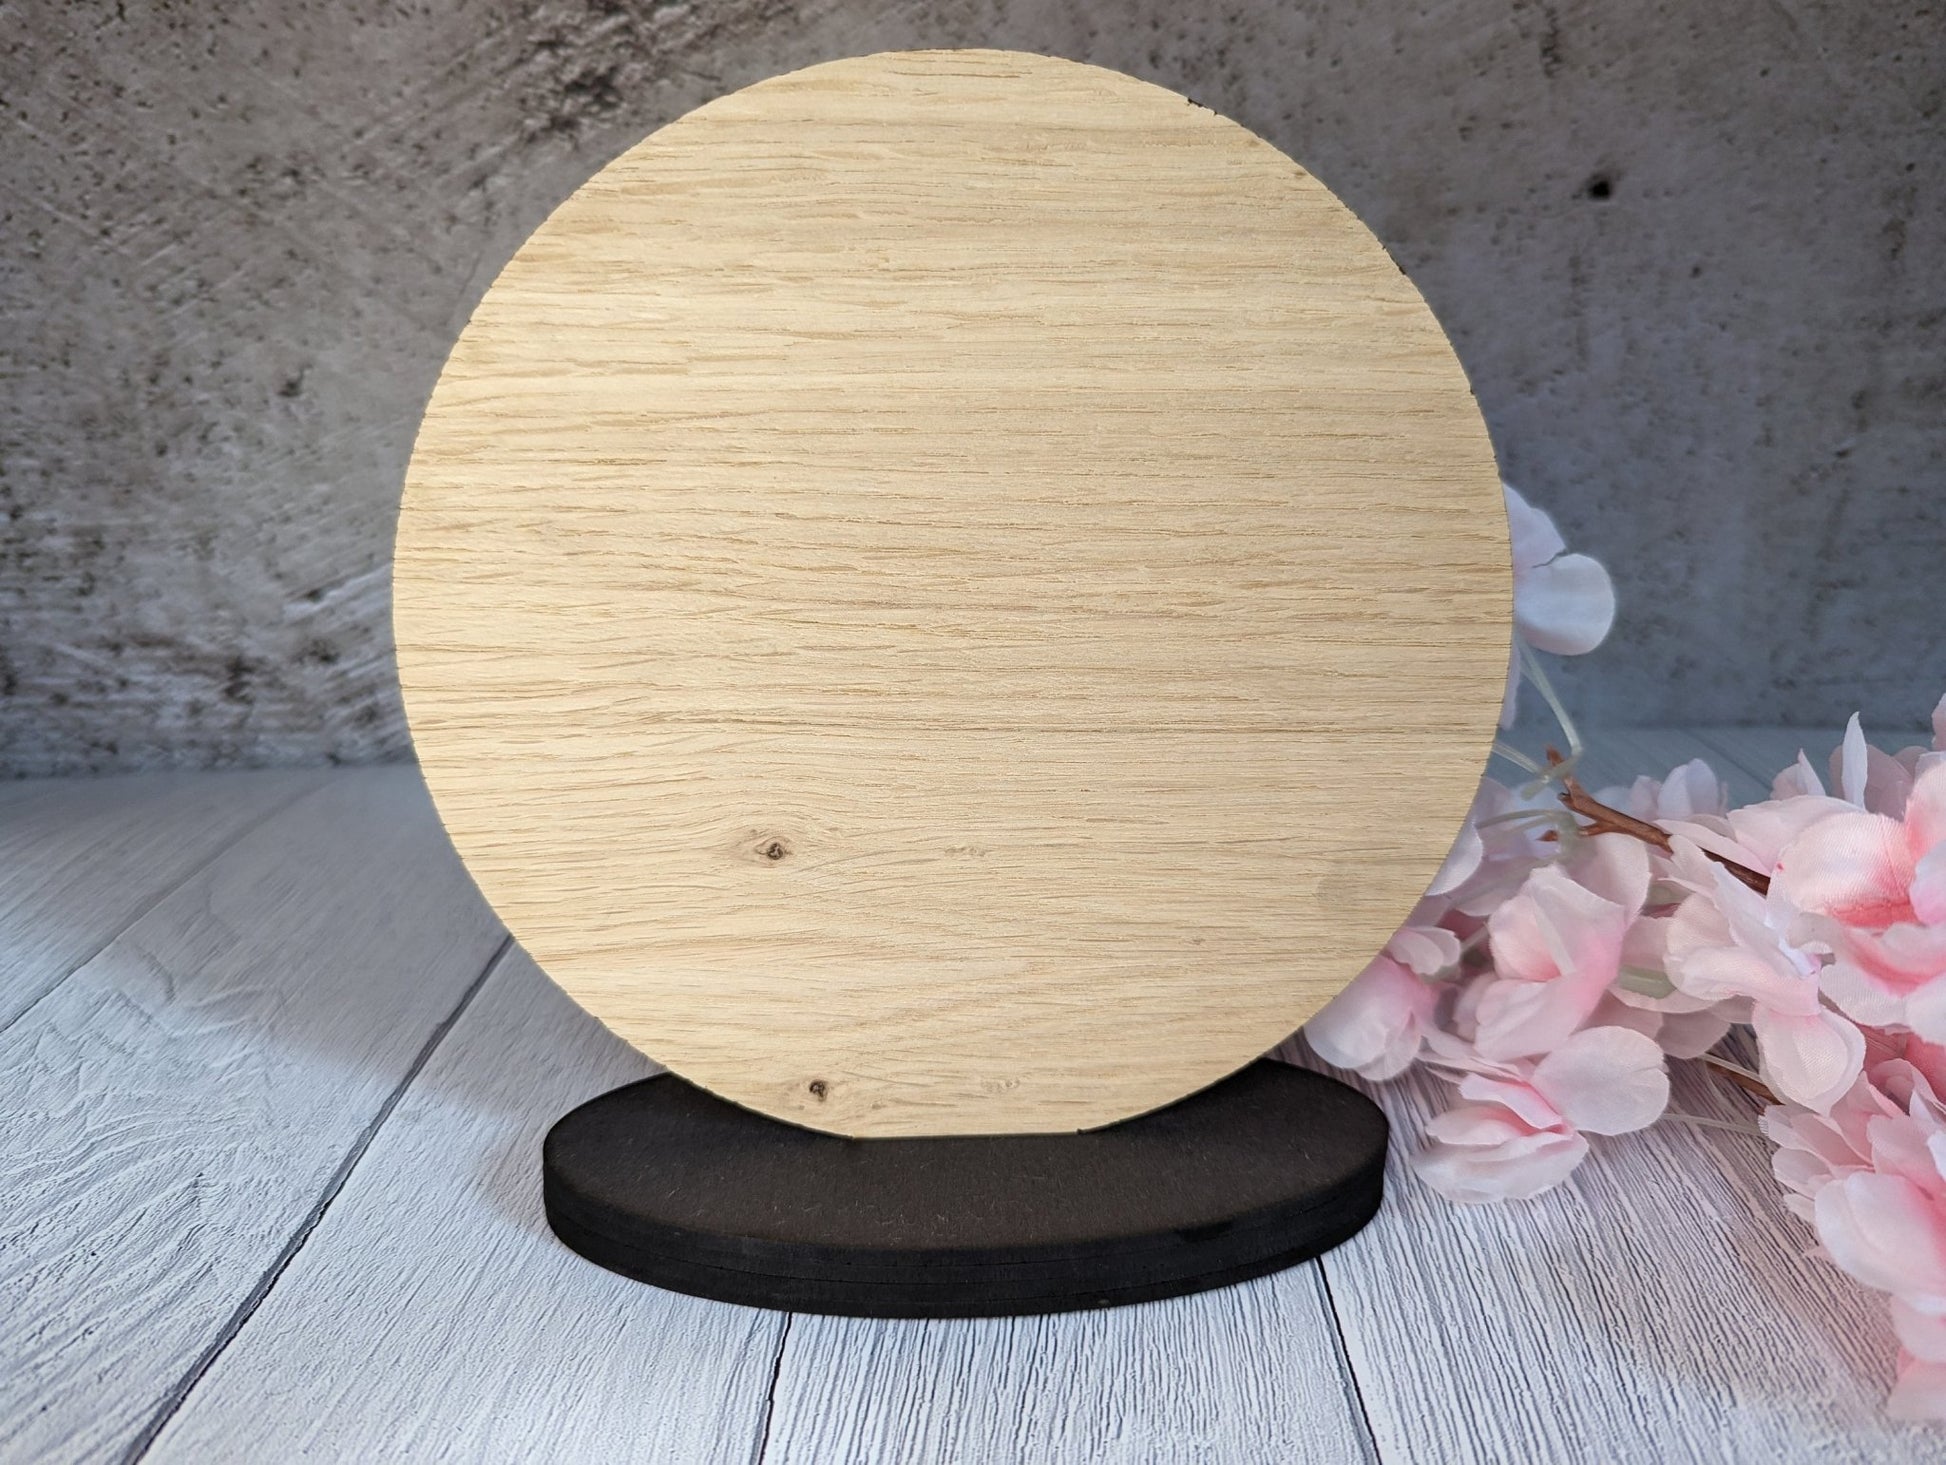 Personalised Wooden Tennis Trophies | Tennis Ball Shaped Award for Clubs & Events - CherryGroveCraft